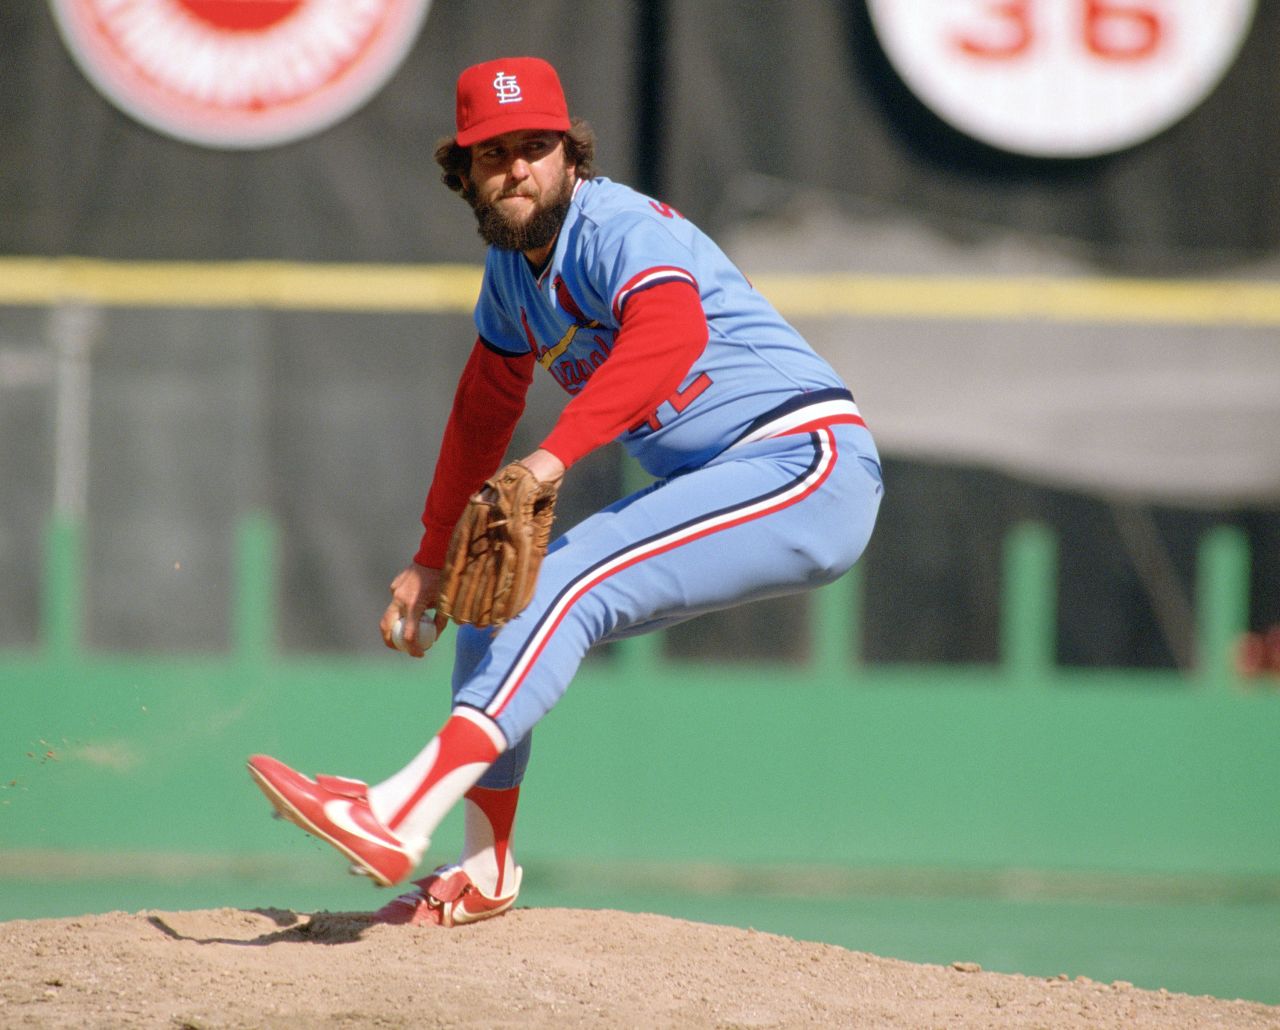 Hall of Fame baseball pitcher Bruce Sutter, who saved his career while popularizing the split-finger fastball, died at the age of 69, Major League Baseball announced on October 14.